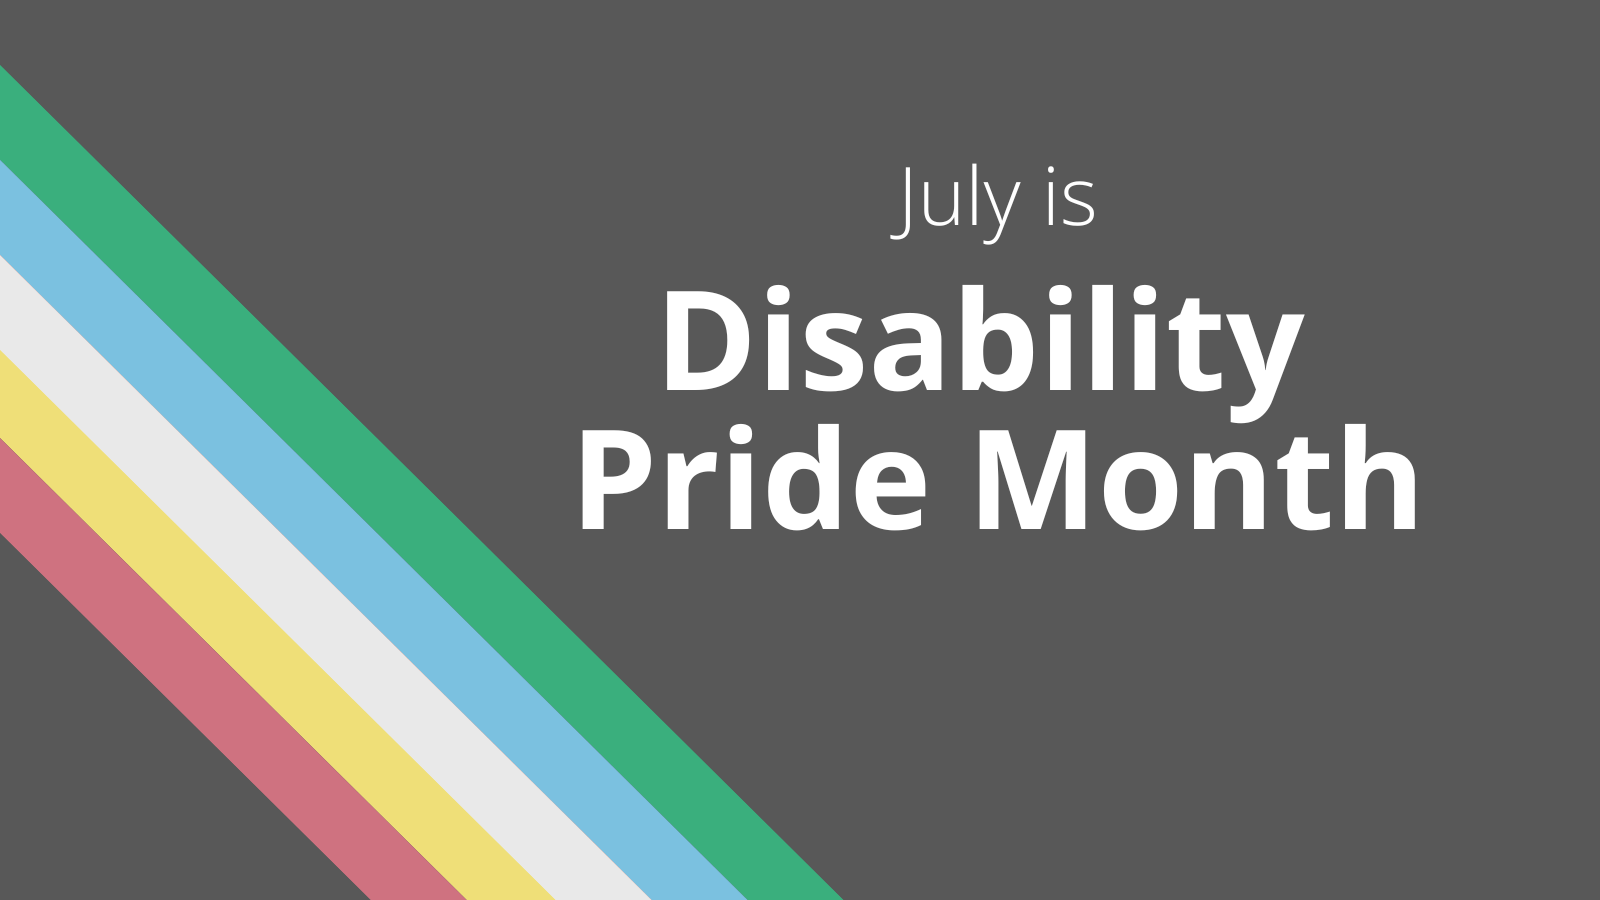 Why We Celebrate Disability Pride Month